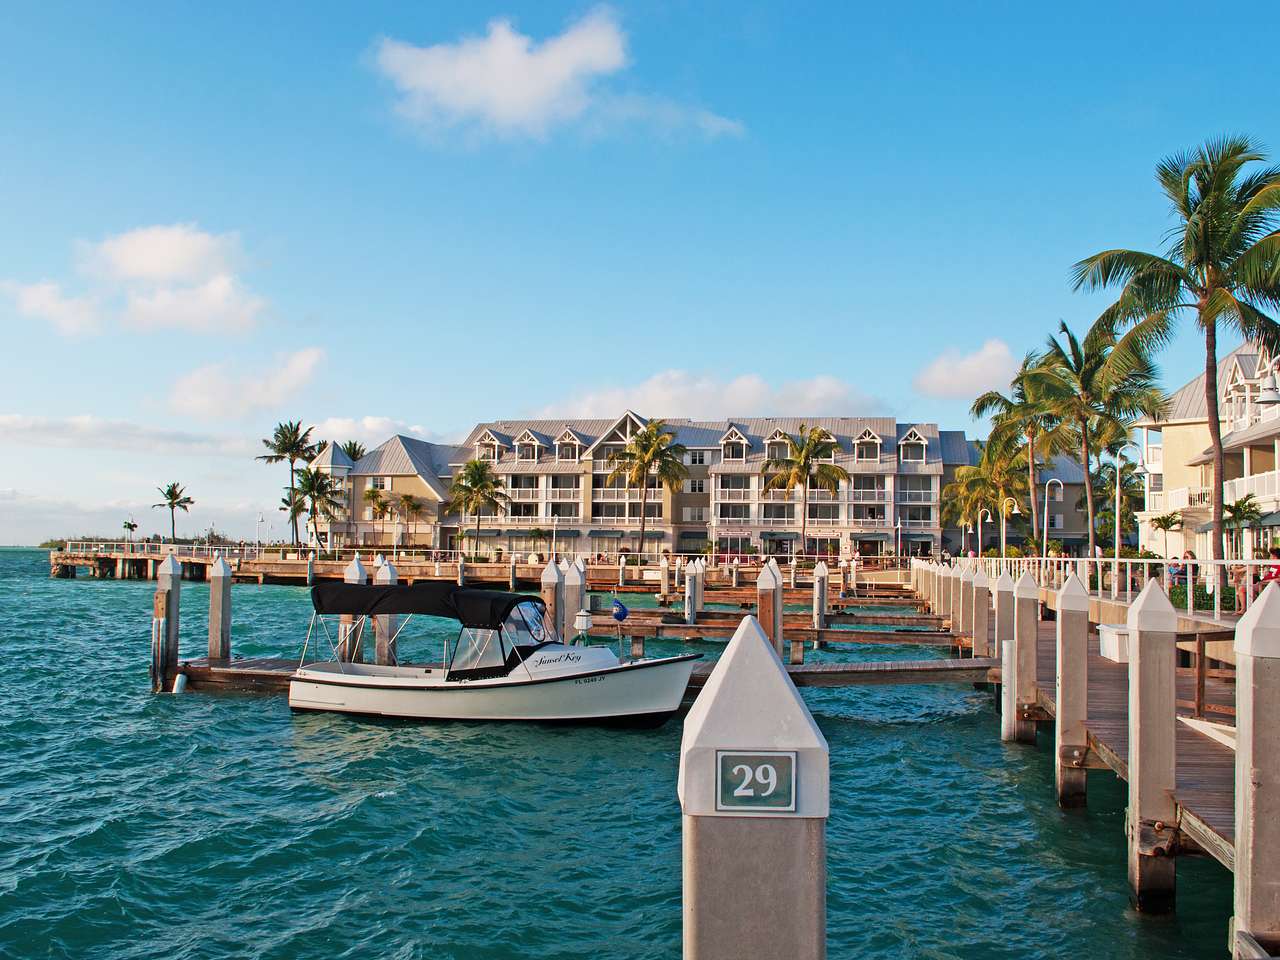 22 Fun Facts About Key West, Florida, That May Surprise You